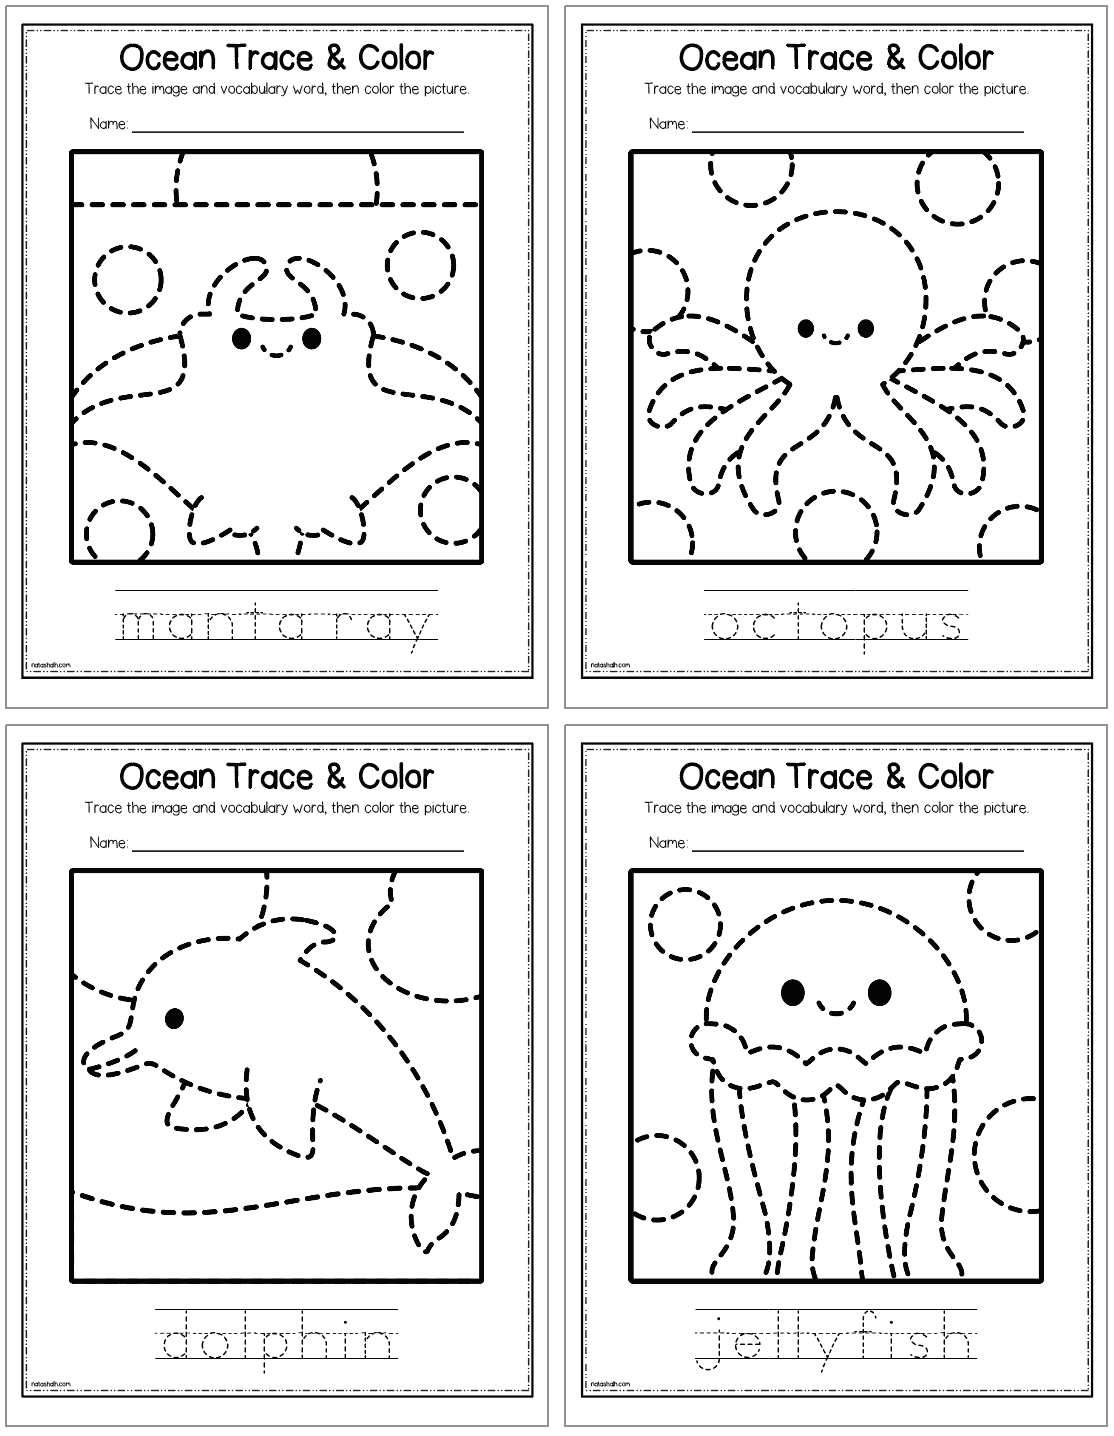 A preview of four ocean animal themed tracing and coloring pages for kids. Animals include: manta ray, octopus, dolphin, and jellyfish